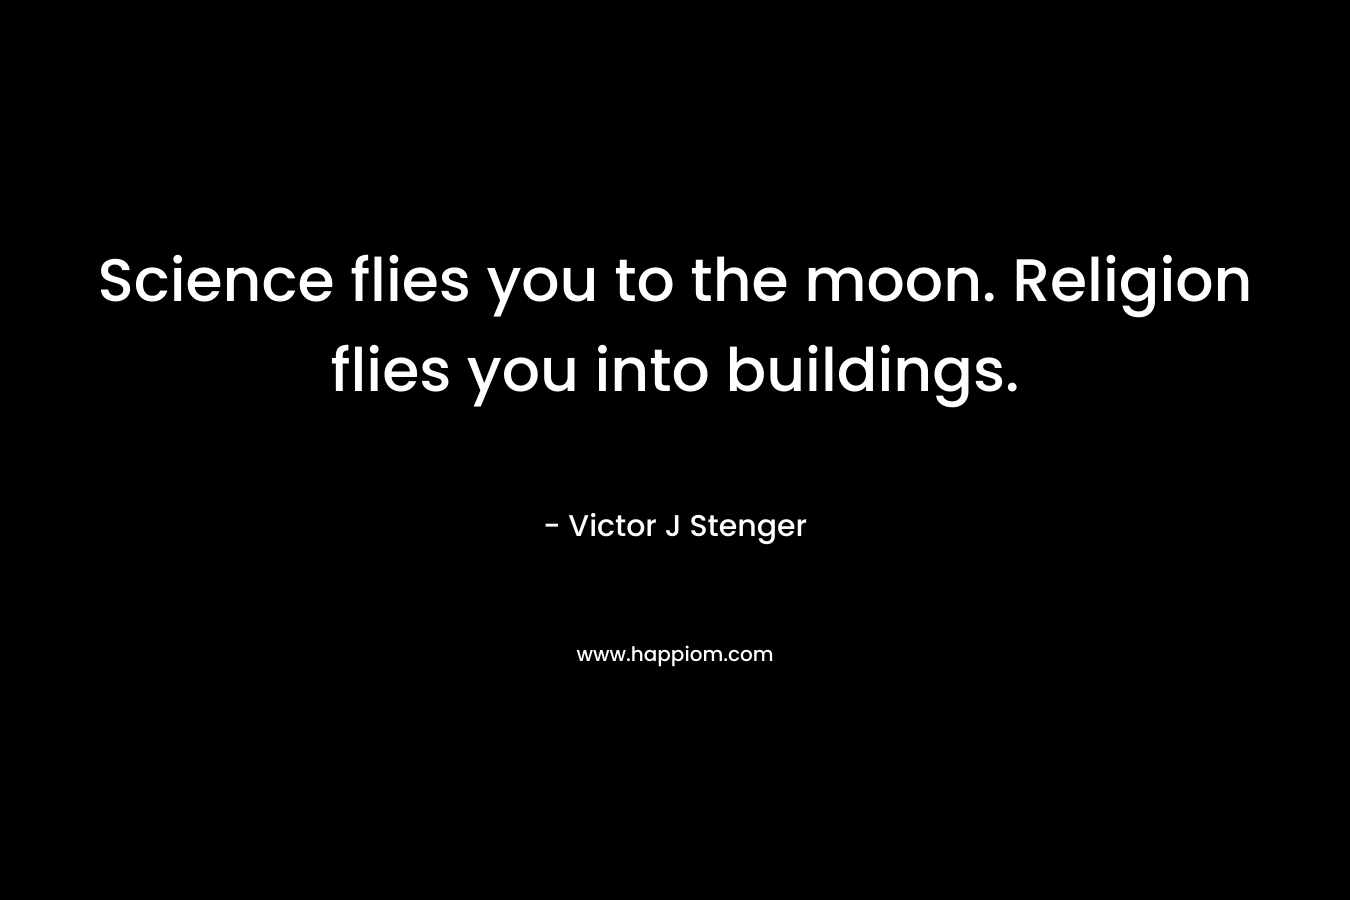 Science flies you to the moon. Religion flies you into buildings. – Victor J Stenger